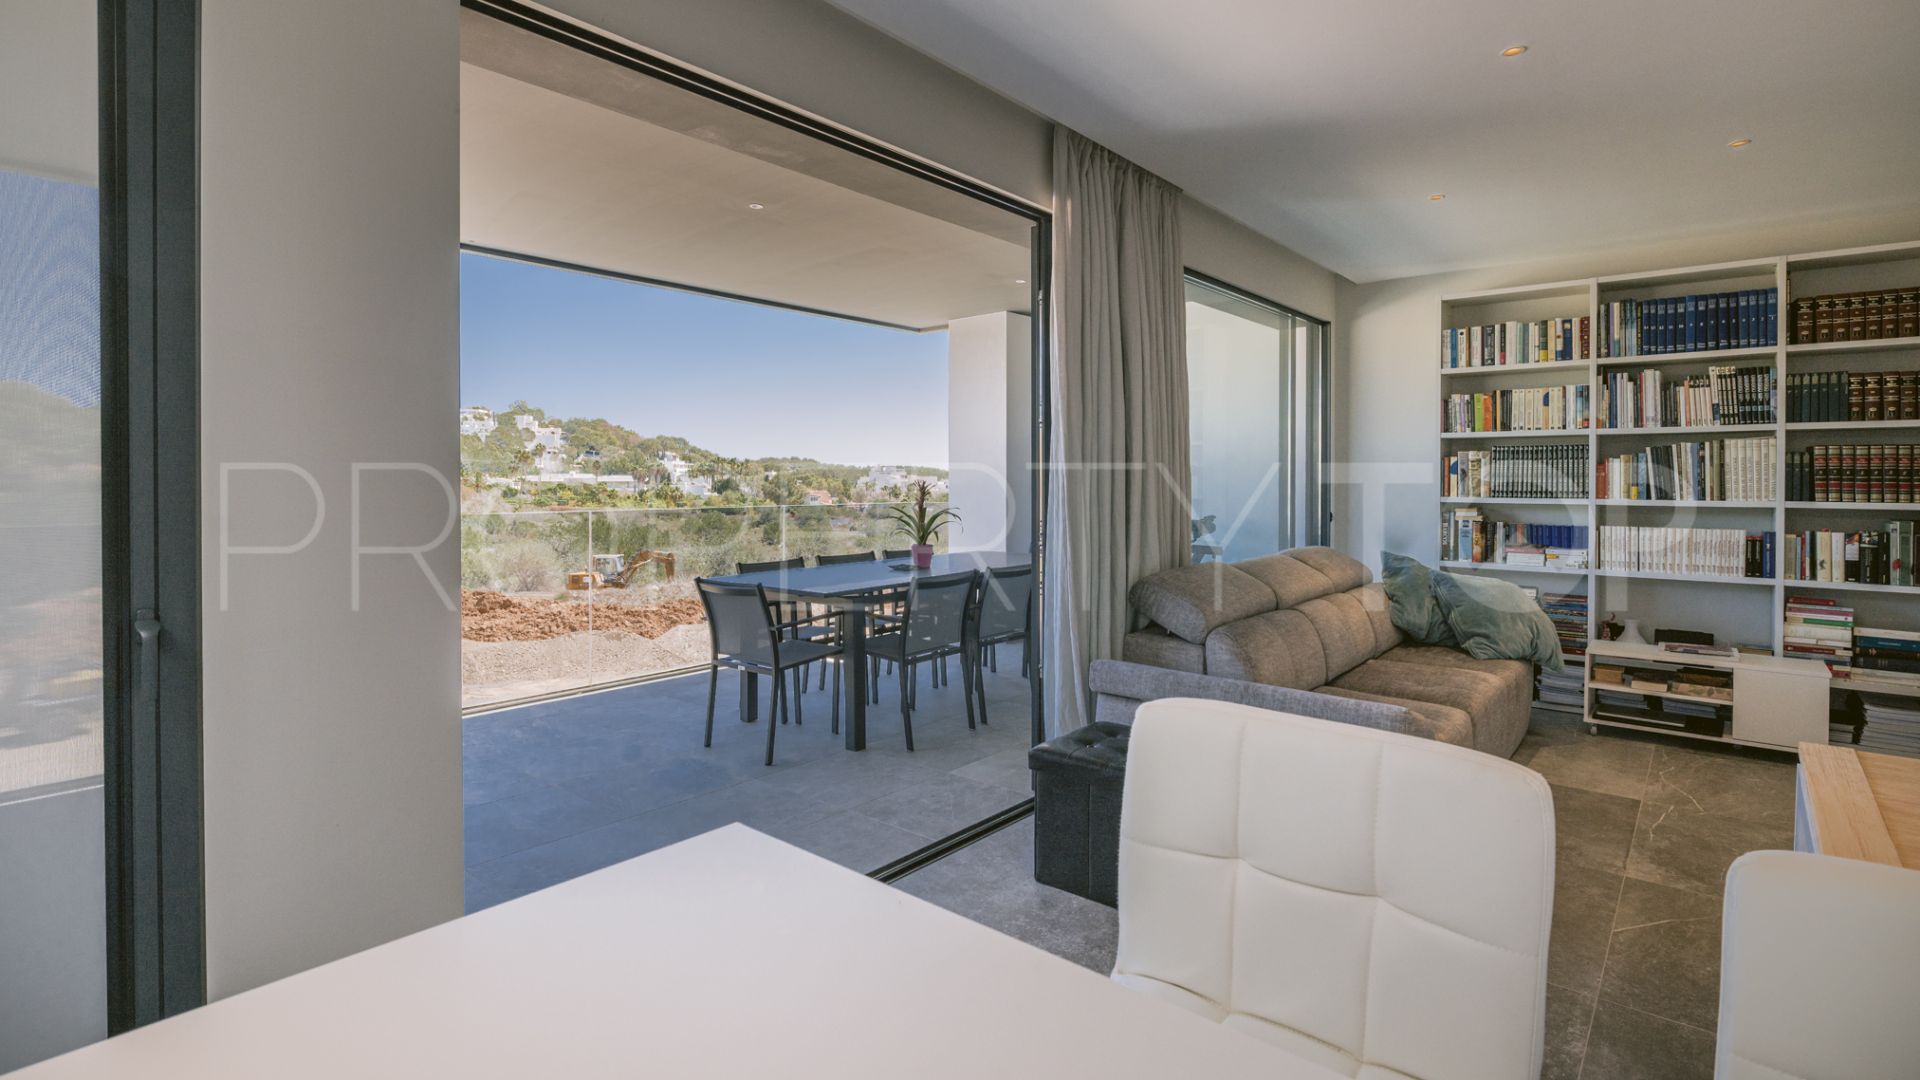 3 bedrooms apartment in Ibiza for sale